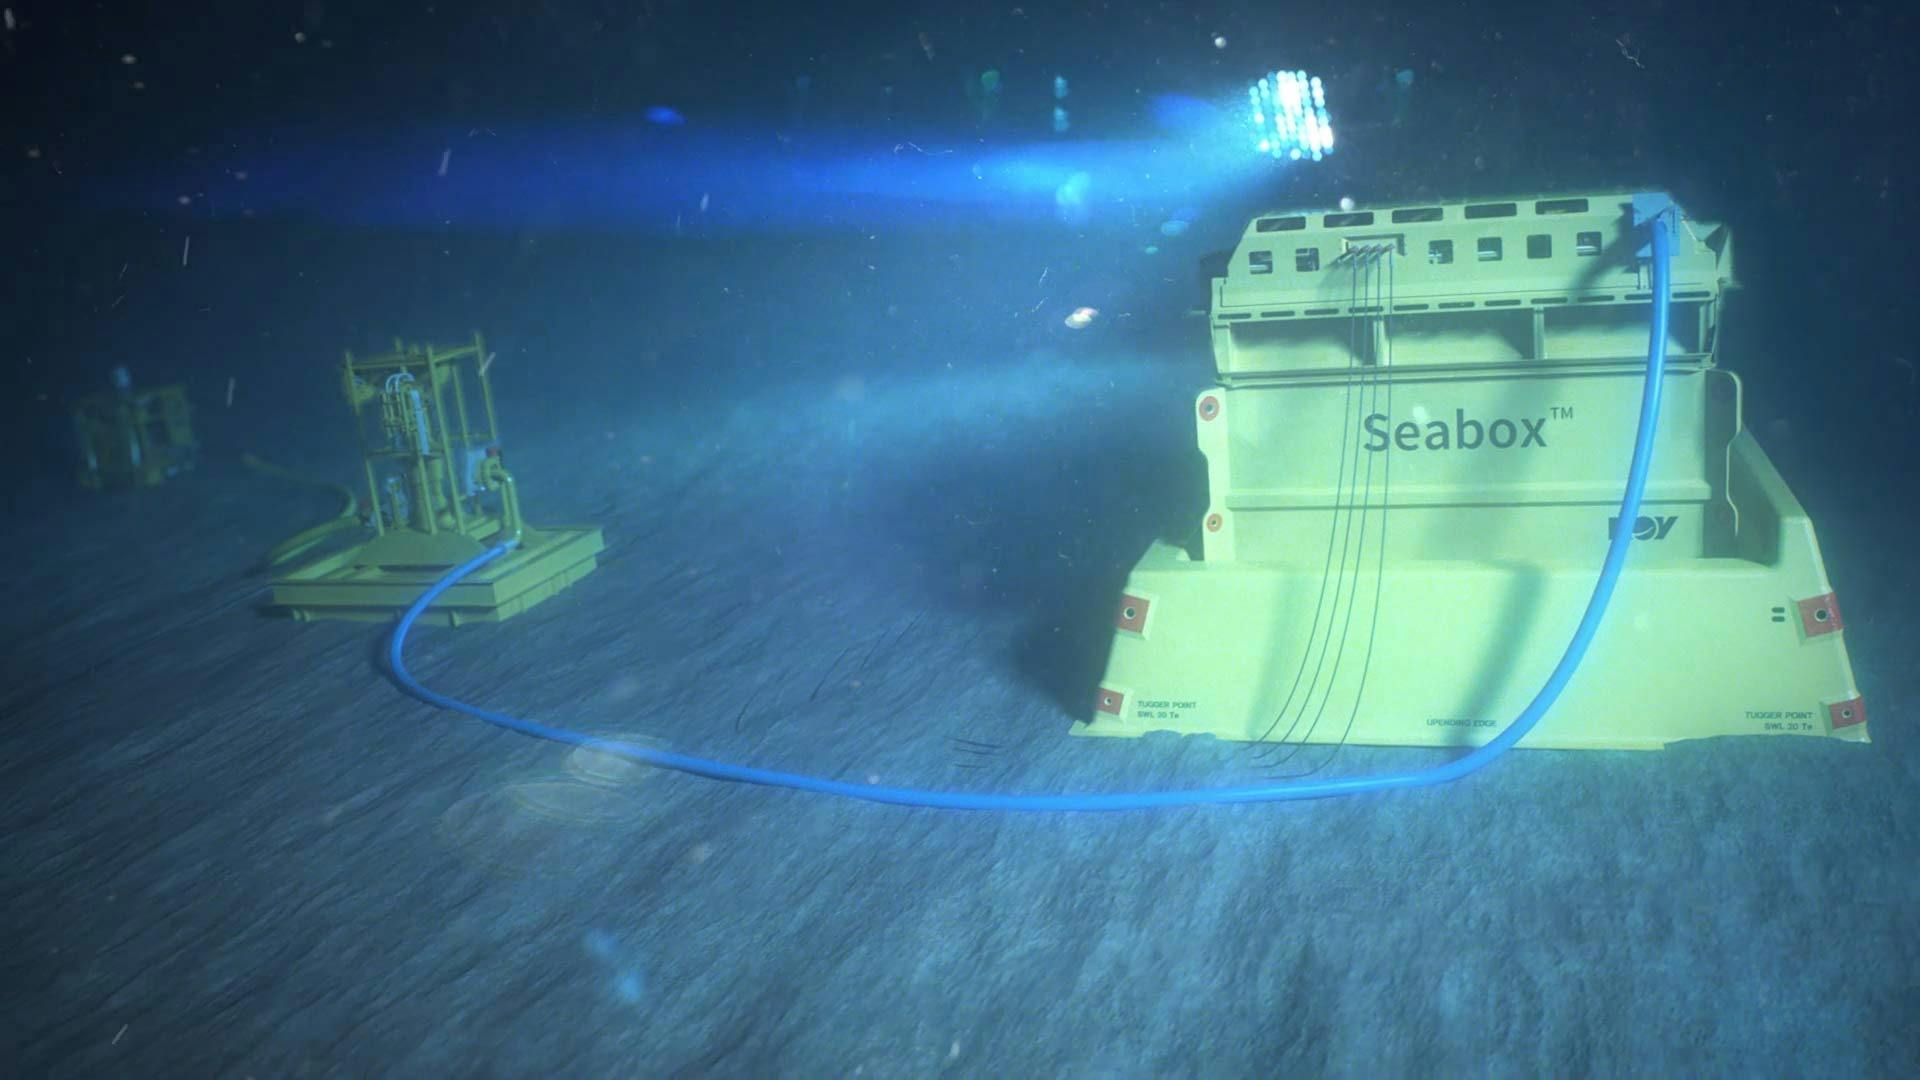 A render of a Seabox water treatment system underwater